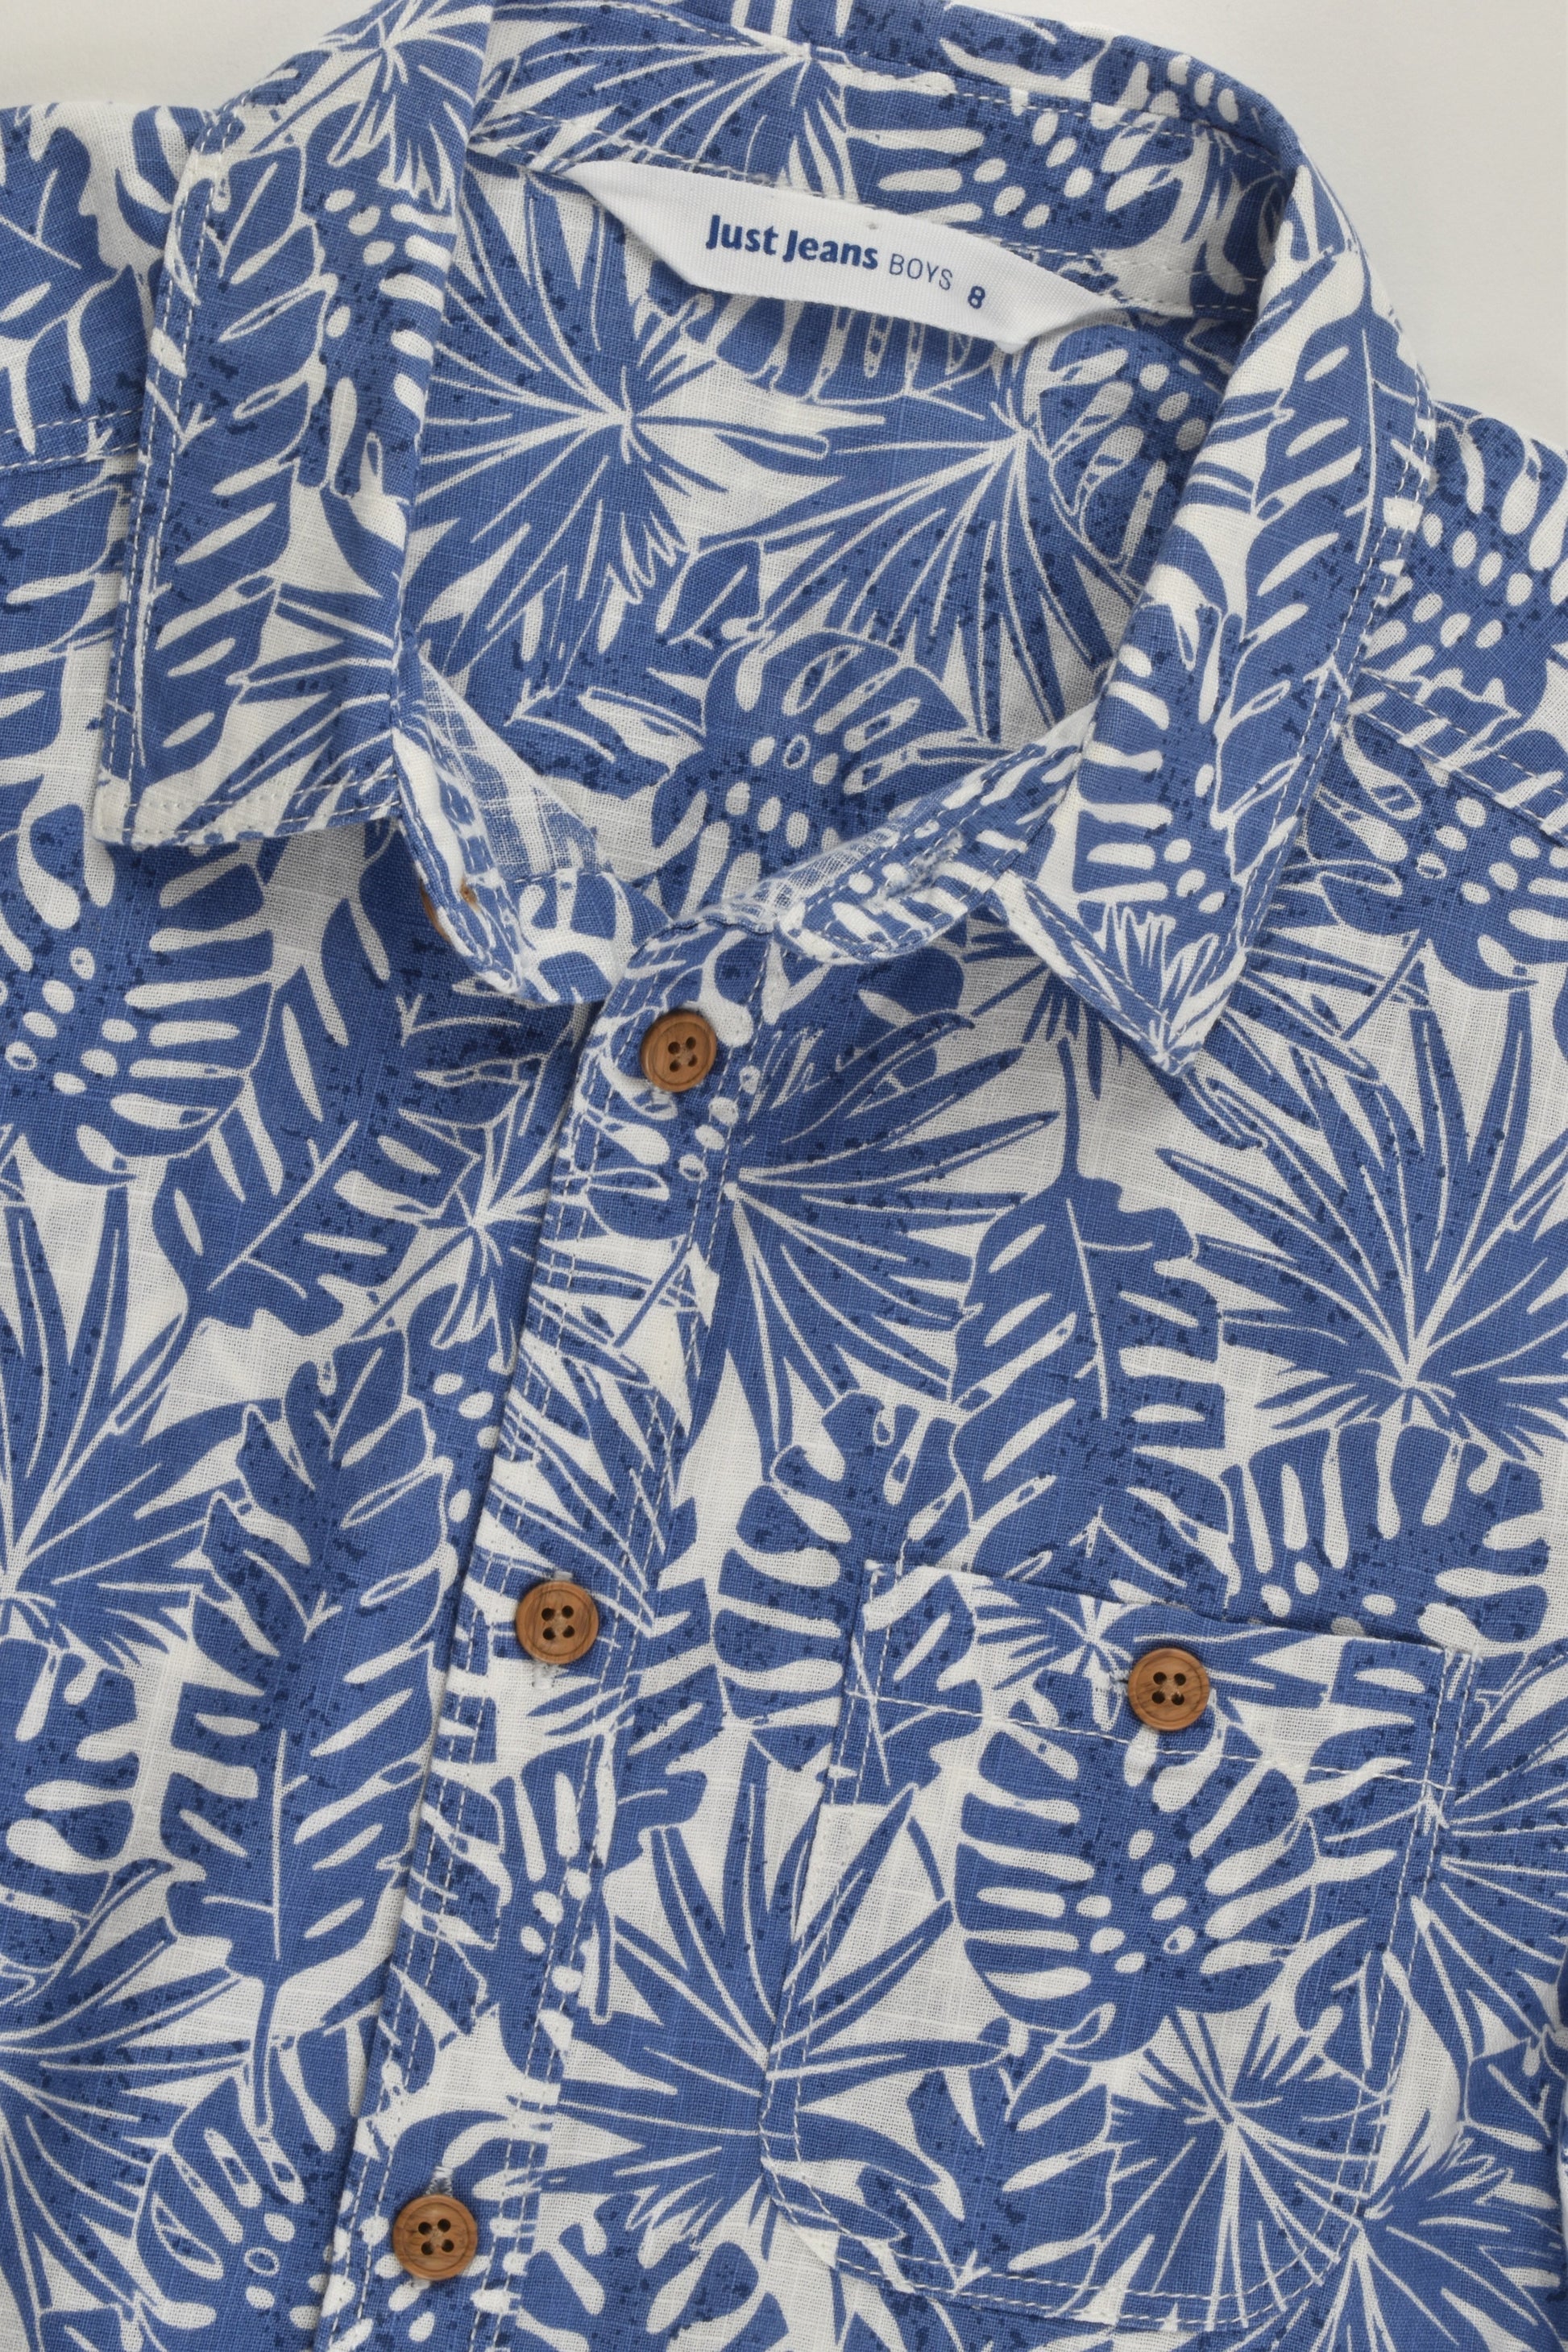 NEW Just Jeans Size 8 Linen Look Shirt Tropical